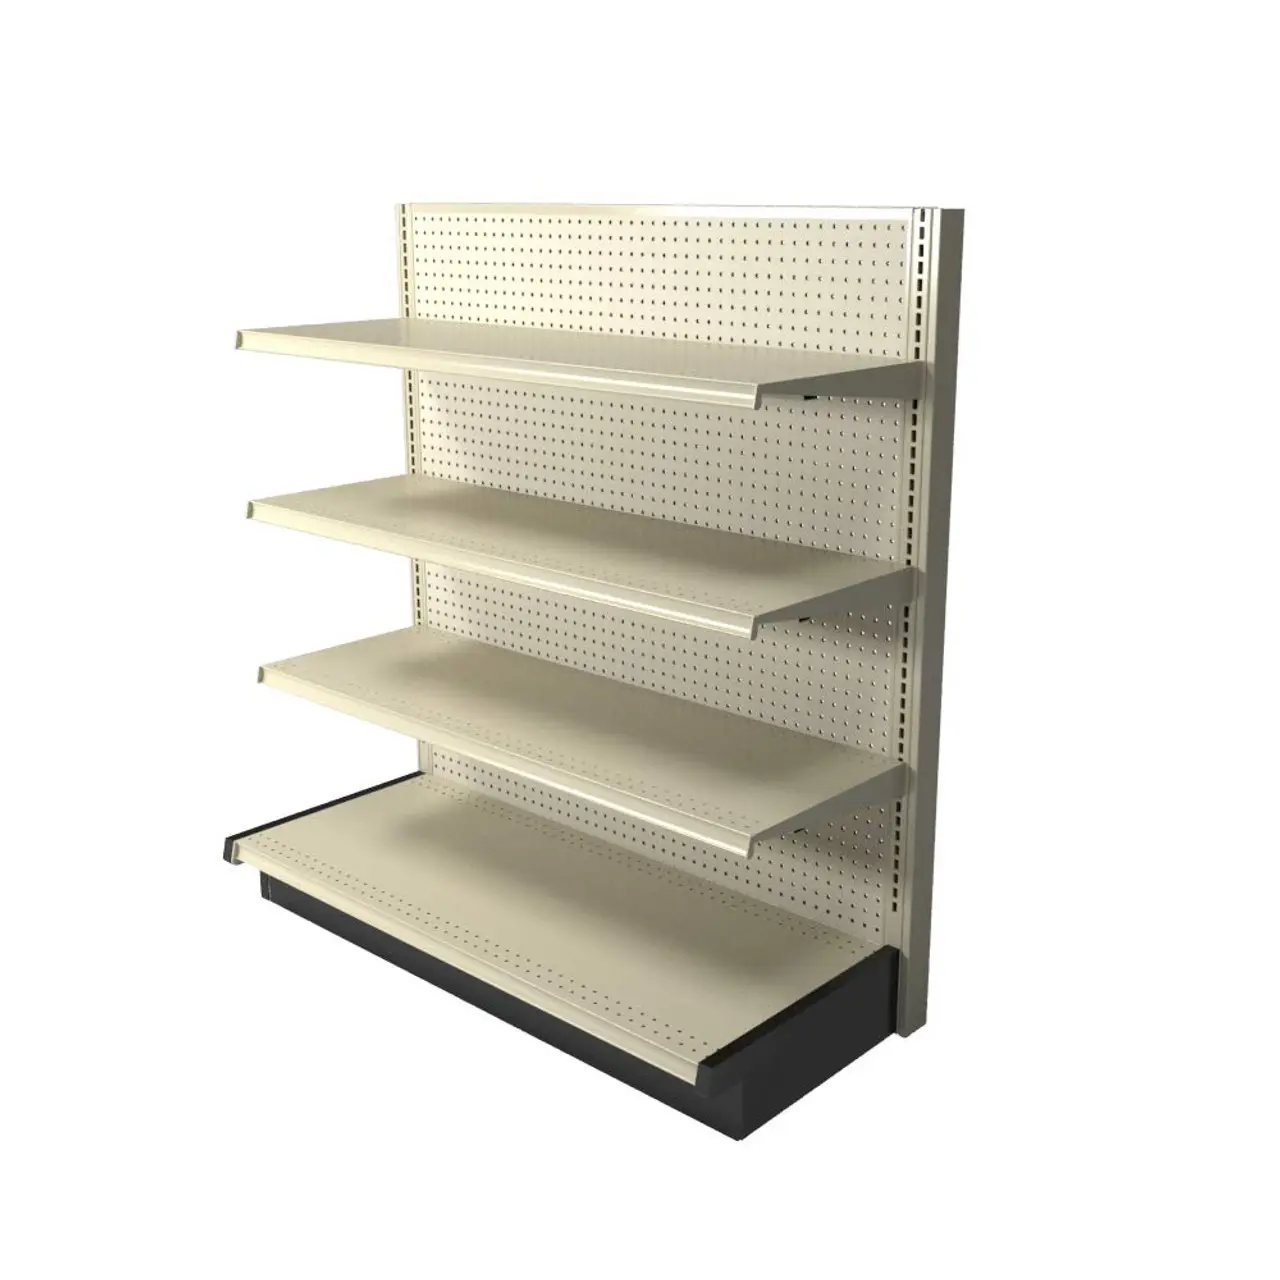 Best Selling L Type Wall Gondola Shelving With 4 Shelves  36W 54H 19D for C-store or Supermarket